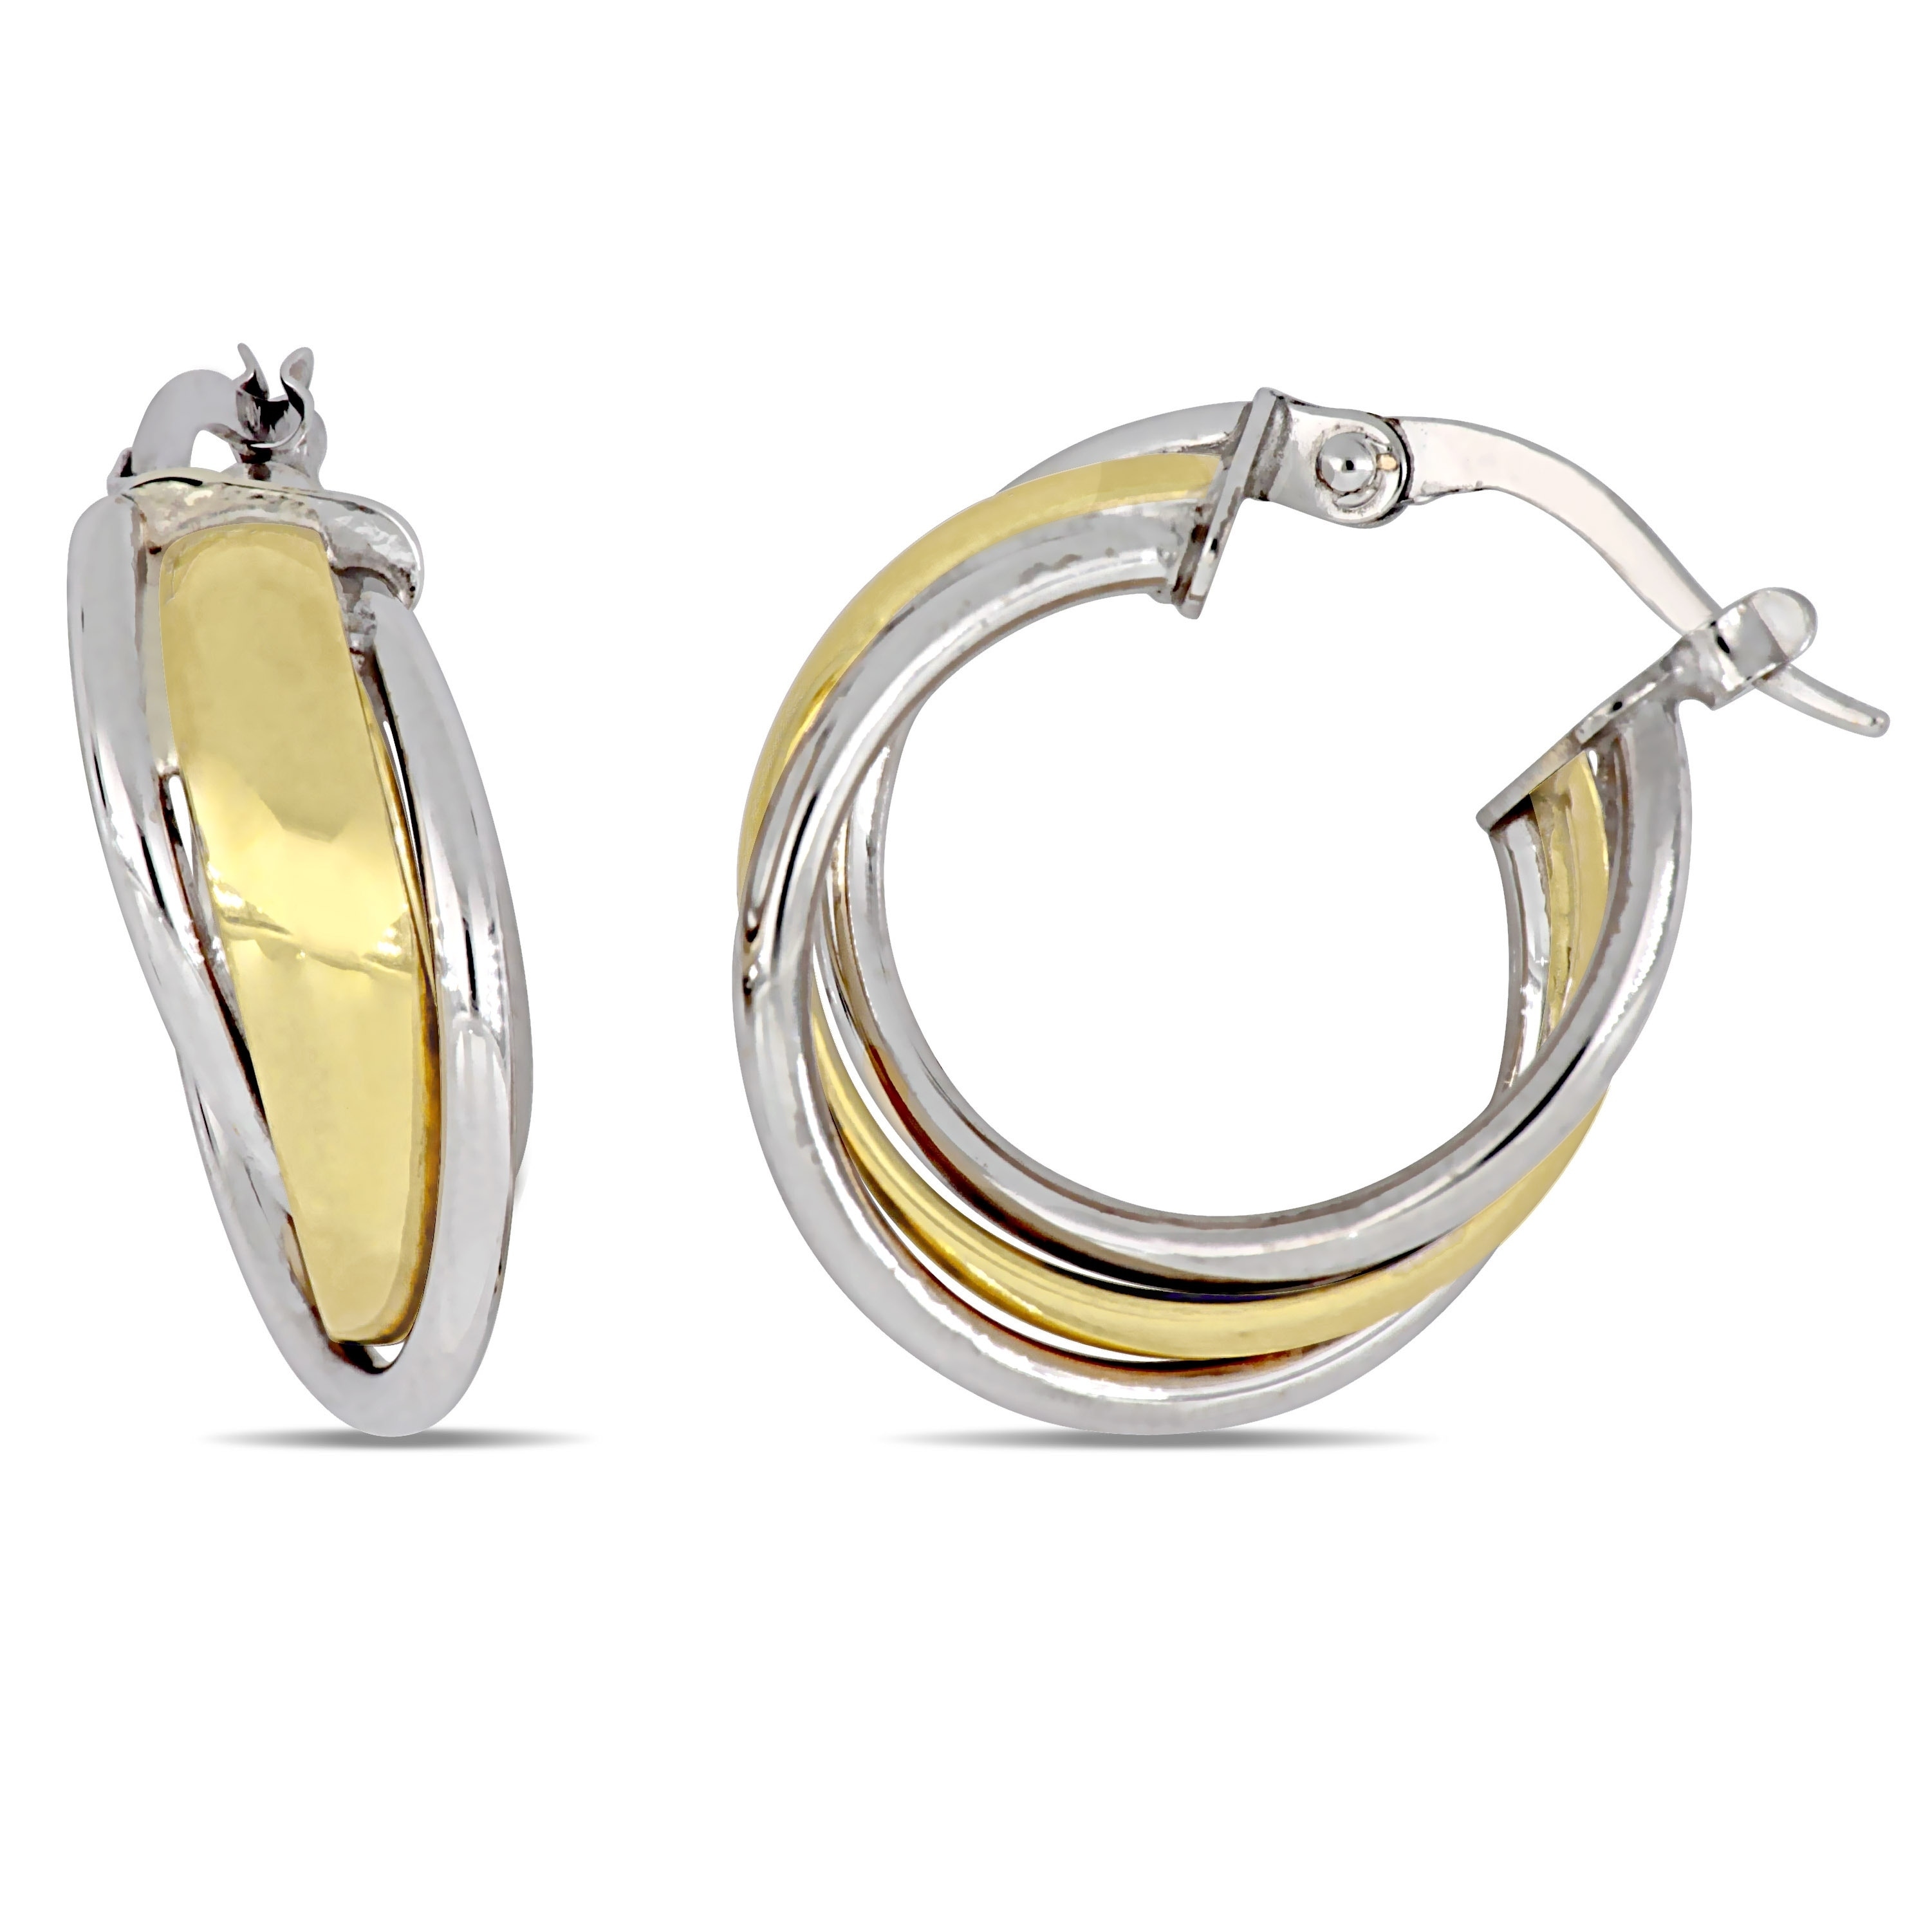 New 14K Solid Real Yellow & White Gold Two-Tone Textured Twisted Hoop Earrings 